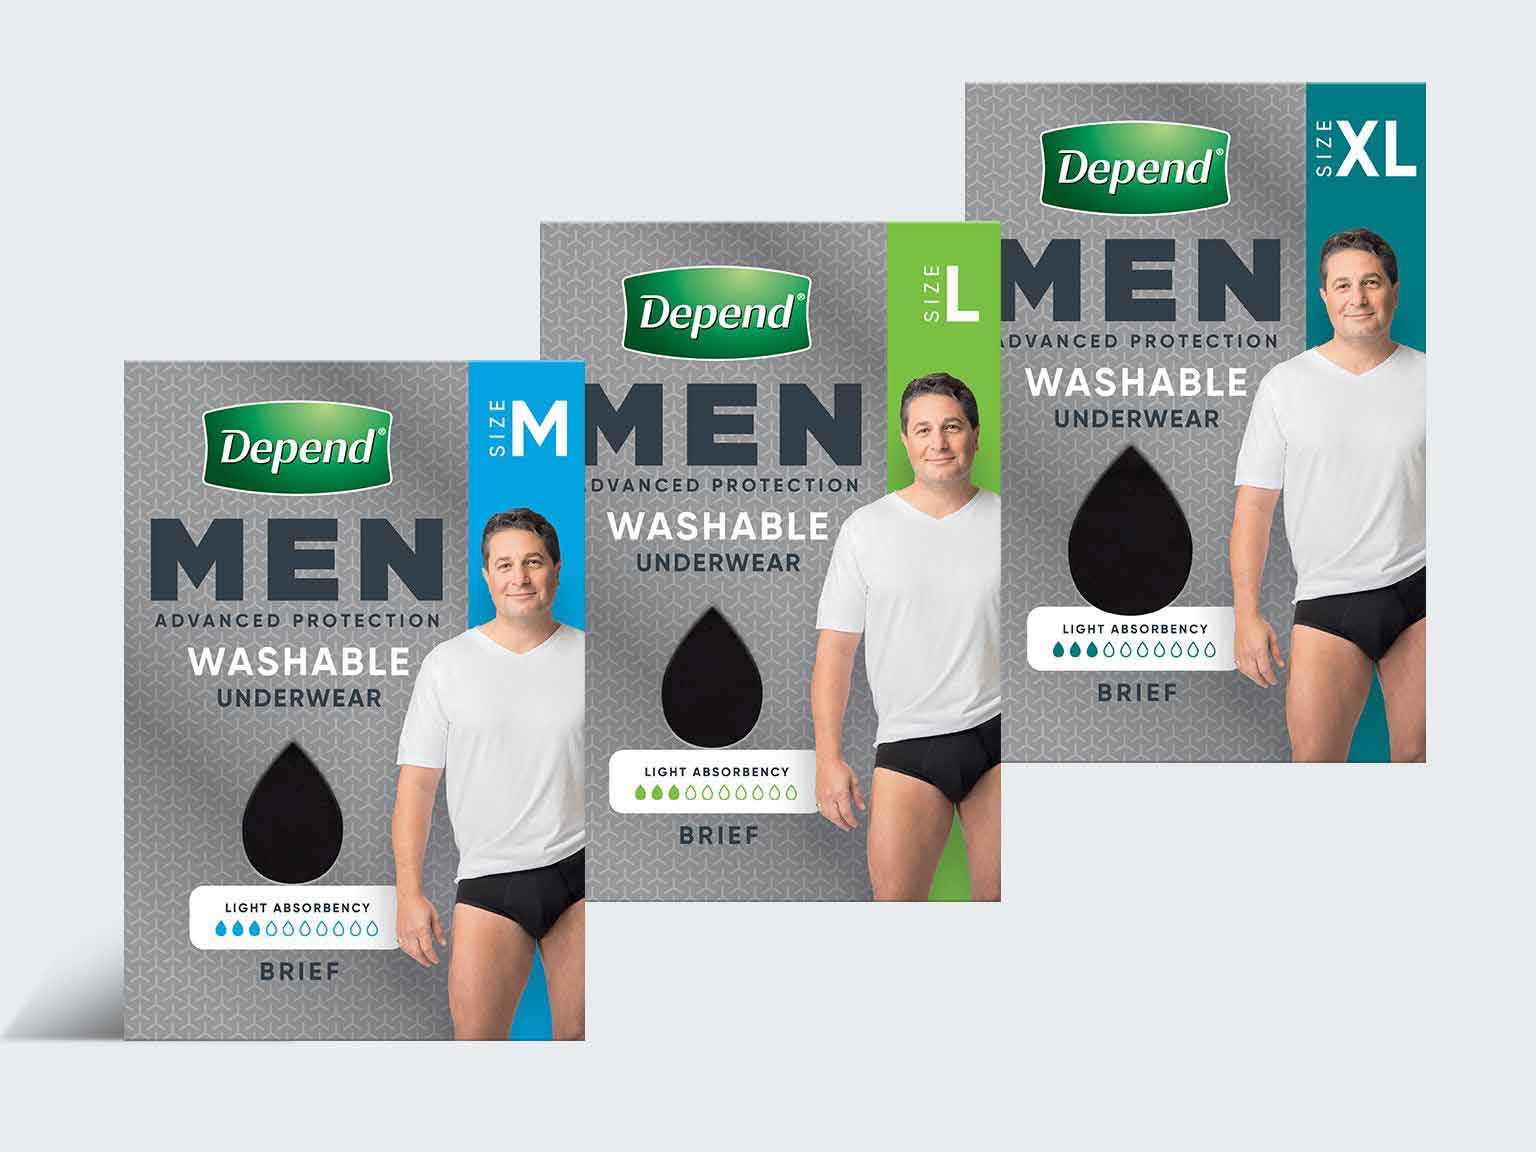 Why Buy Reusable Incontinence Underwear? - TYE Medical